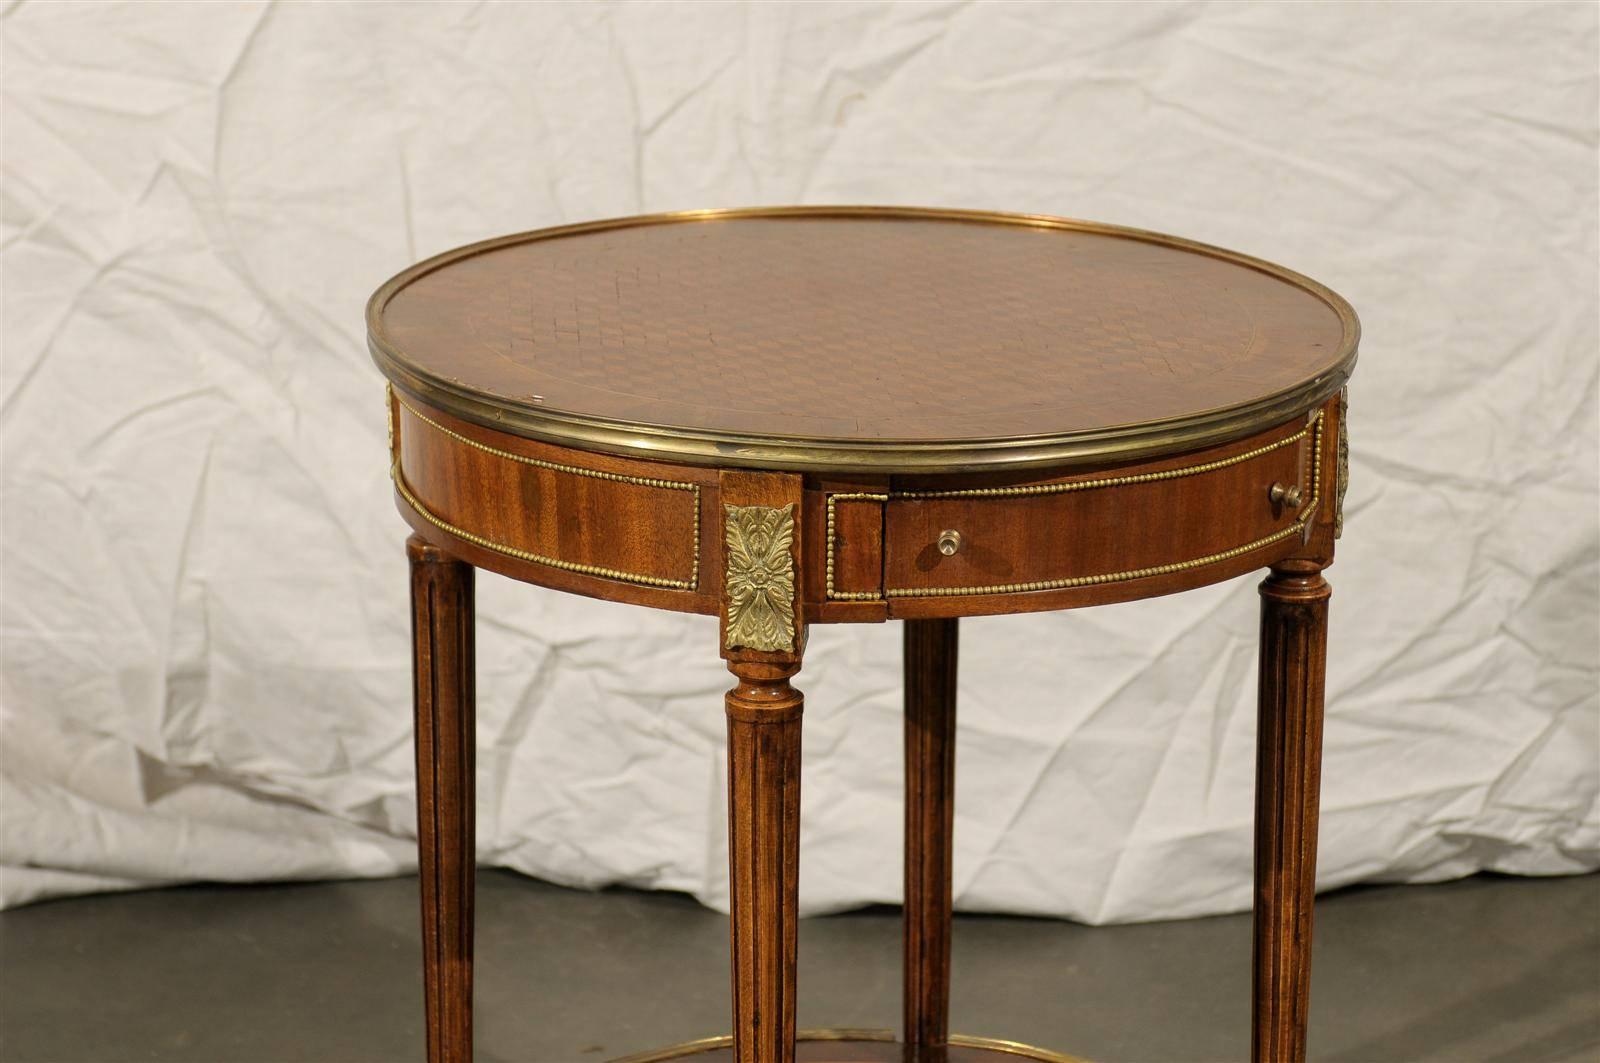 Early 20th Century French Bronze-Mounted Inlaid Bouilotte Table 2